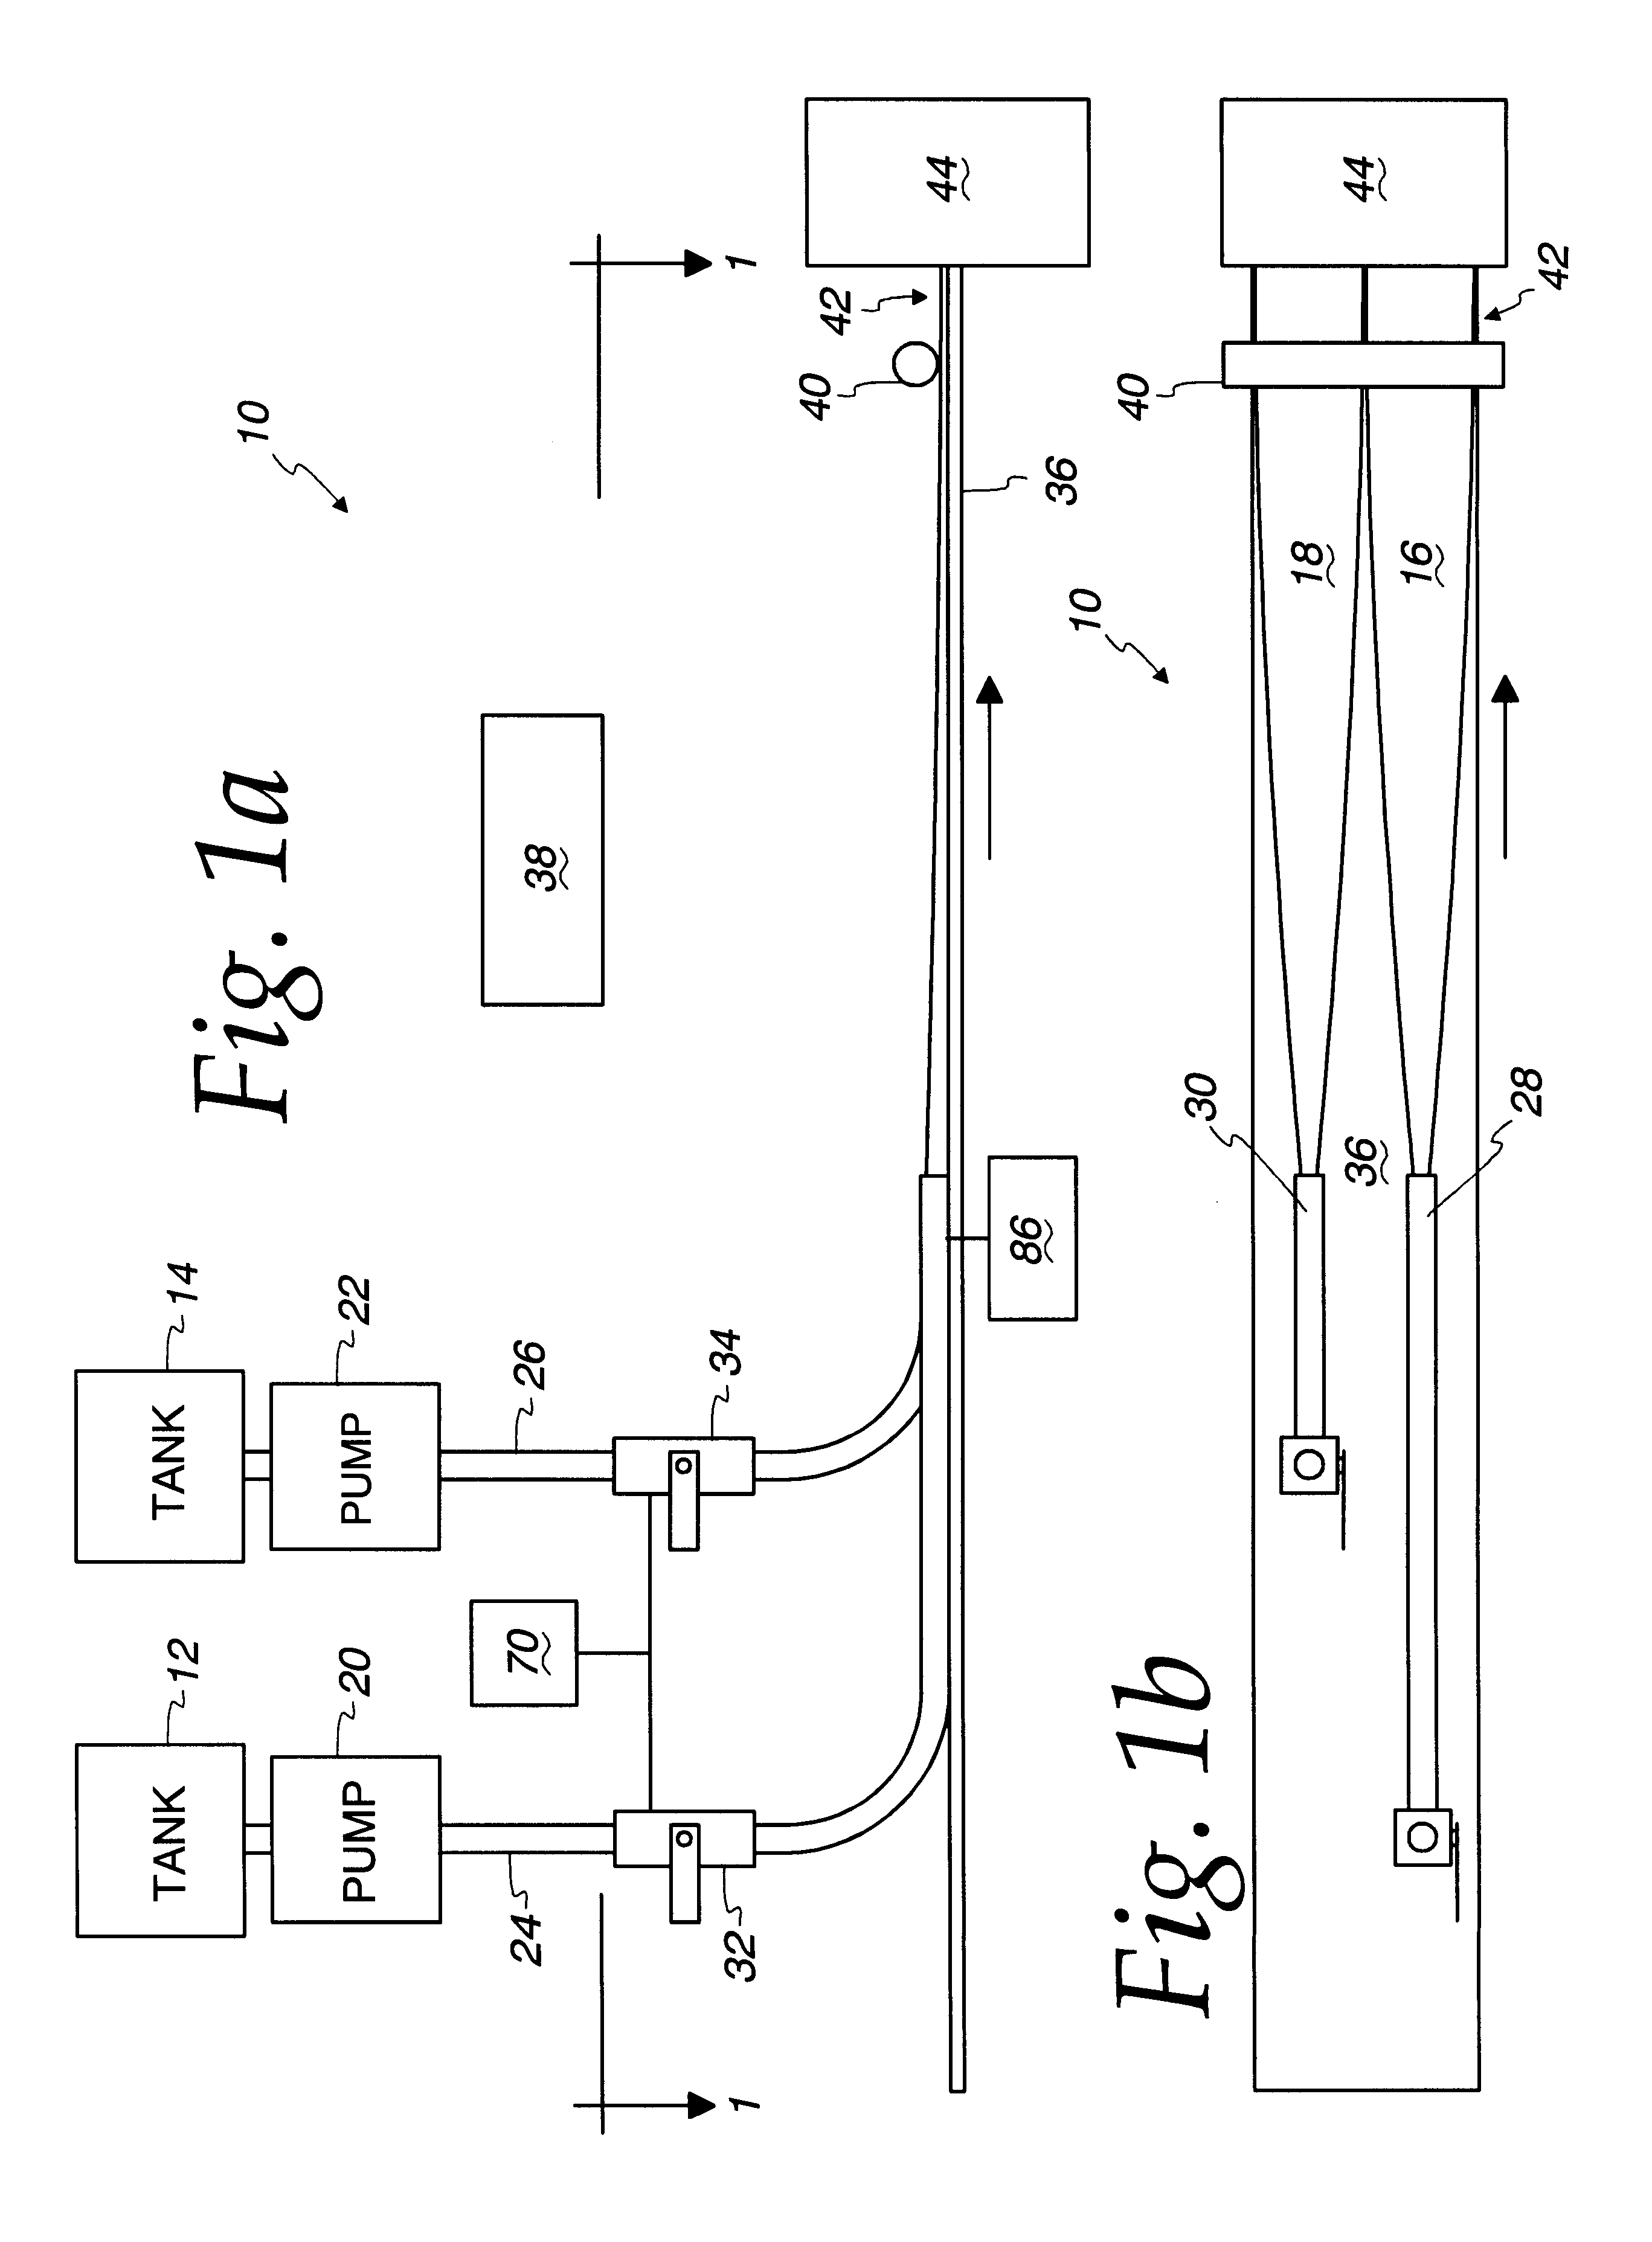 Apparatus for continuous manufacture of multi-colored and/or multi-flavored food product